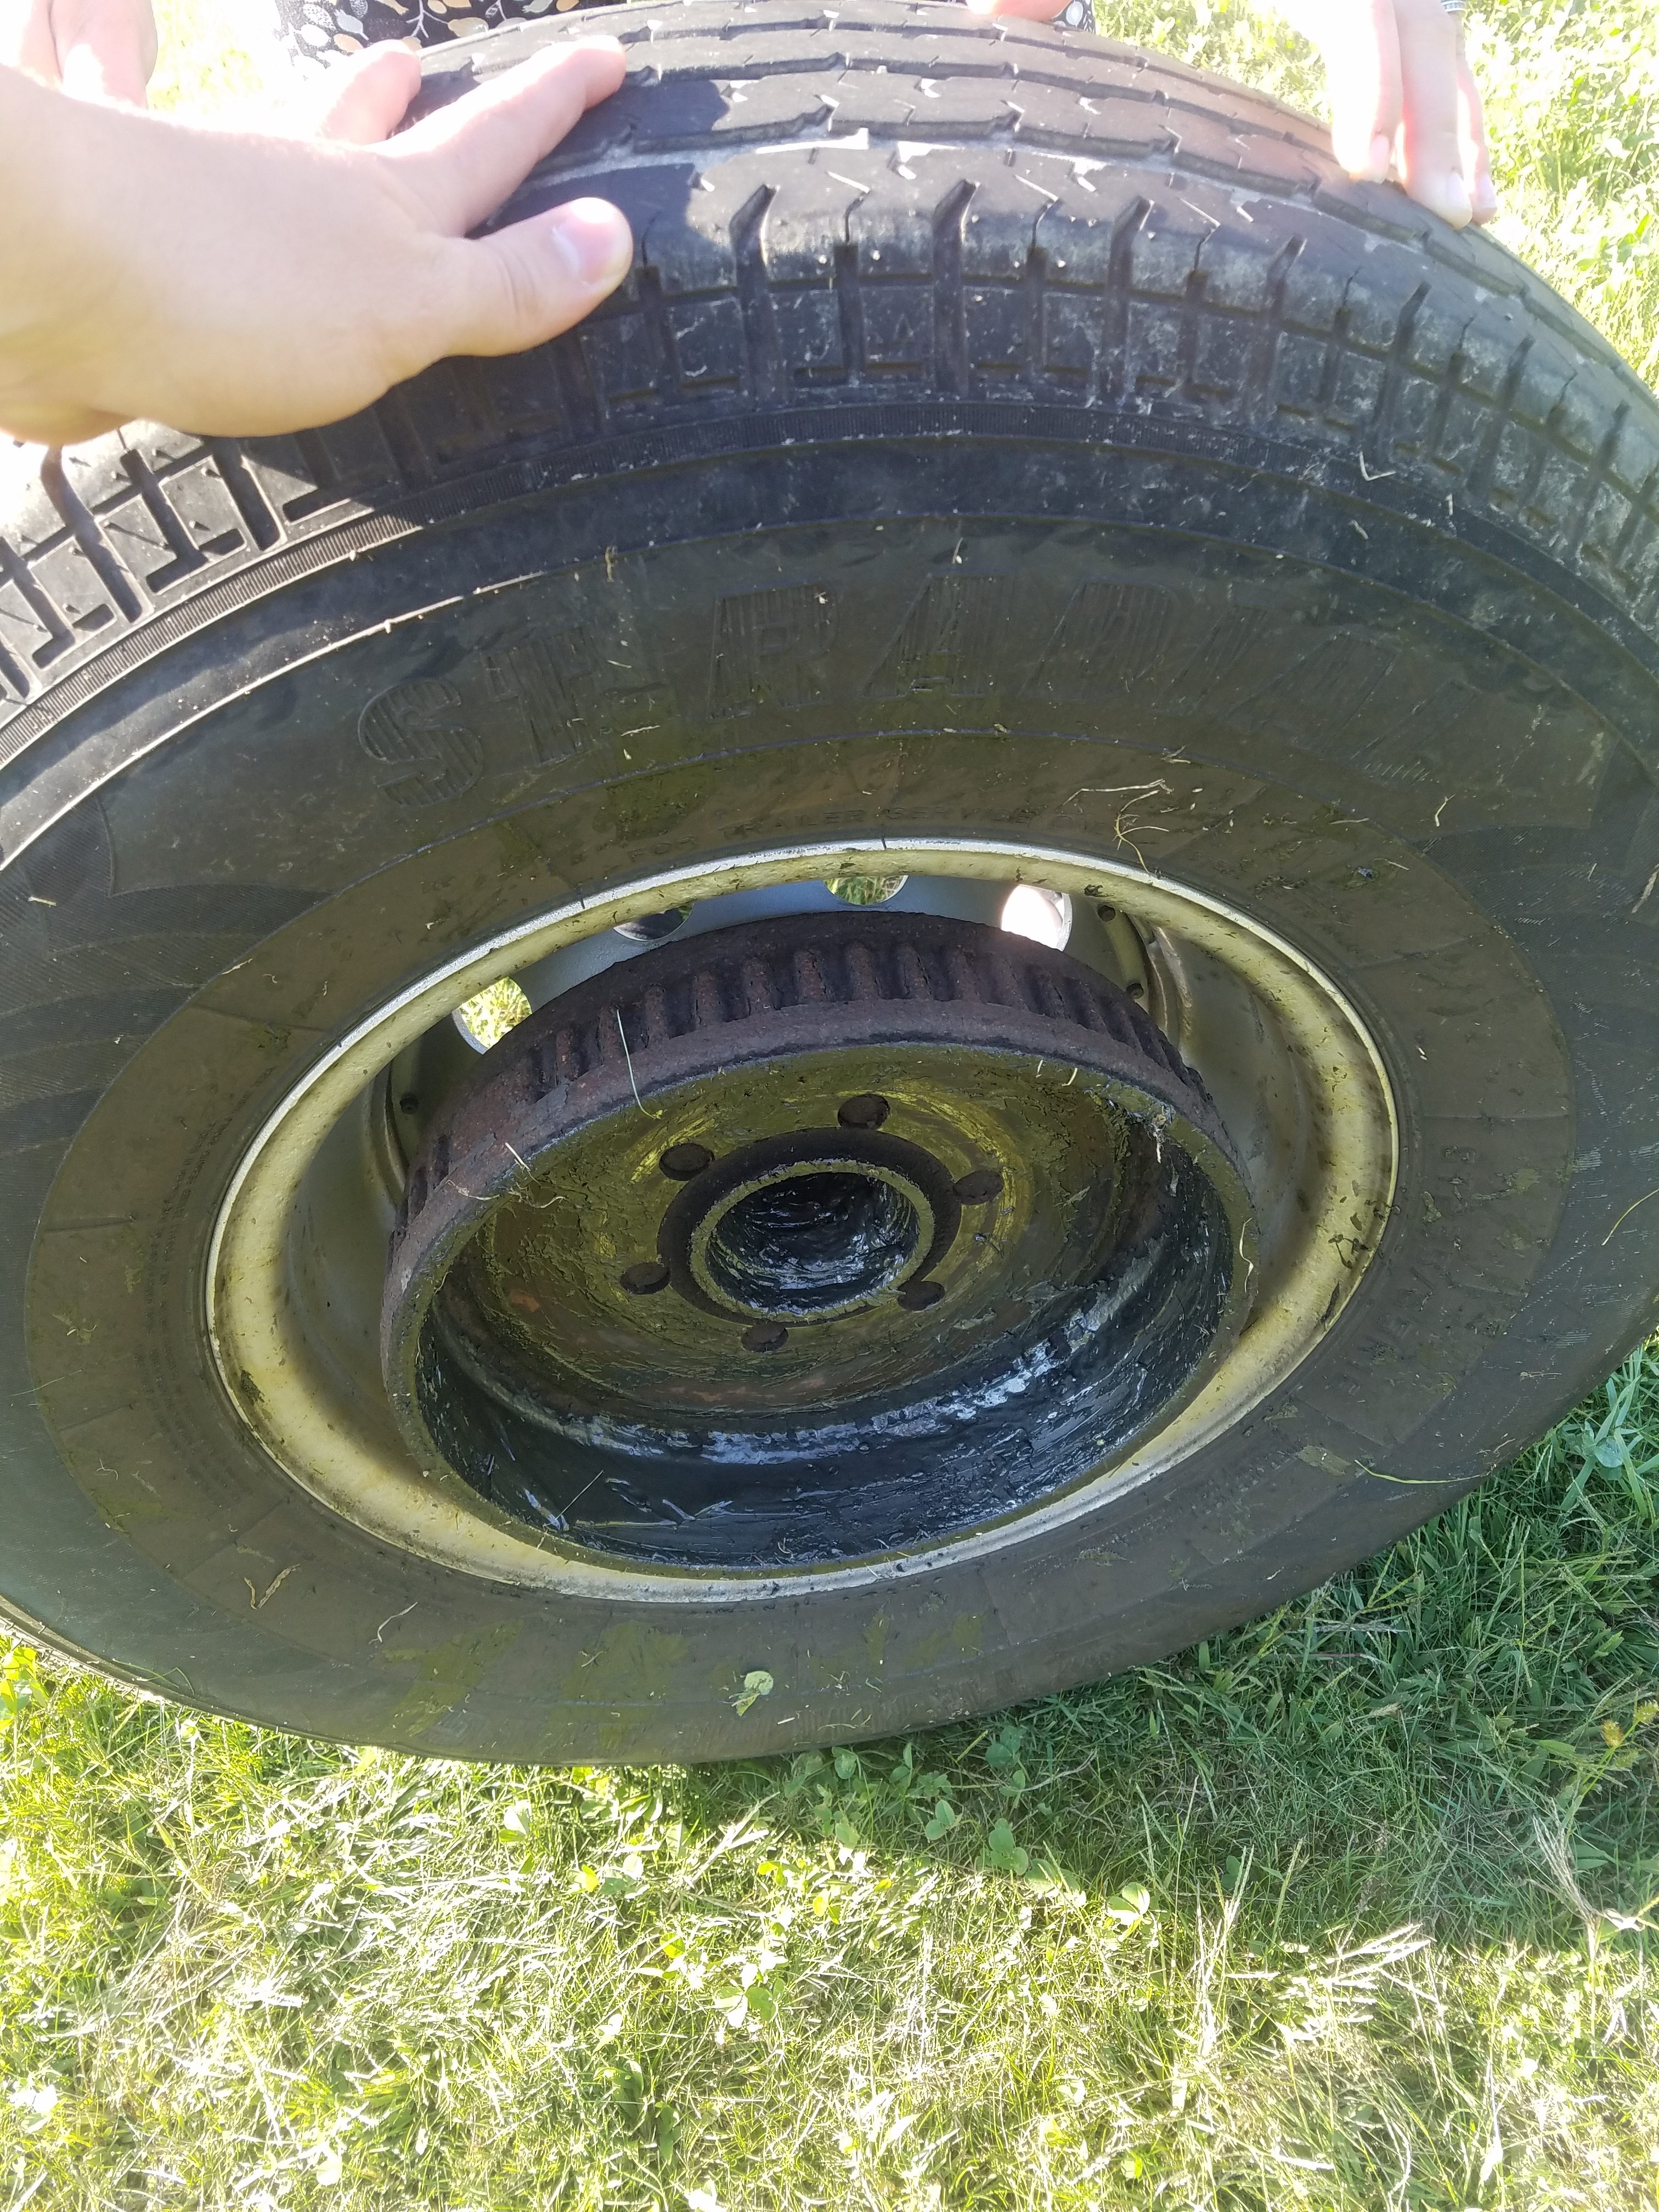 Police are seeking information about a vehicle that lost this tire in North Jay.